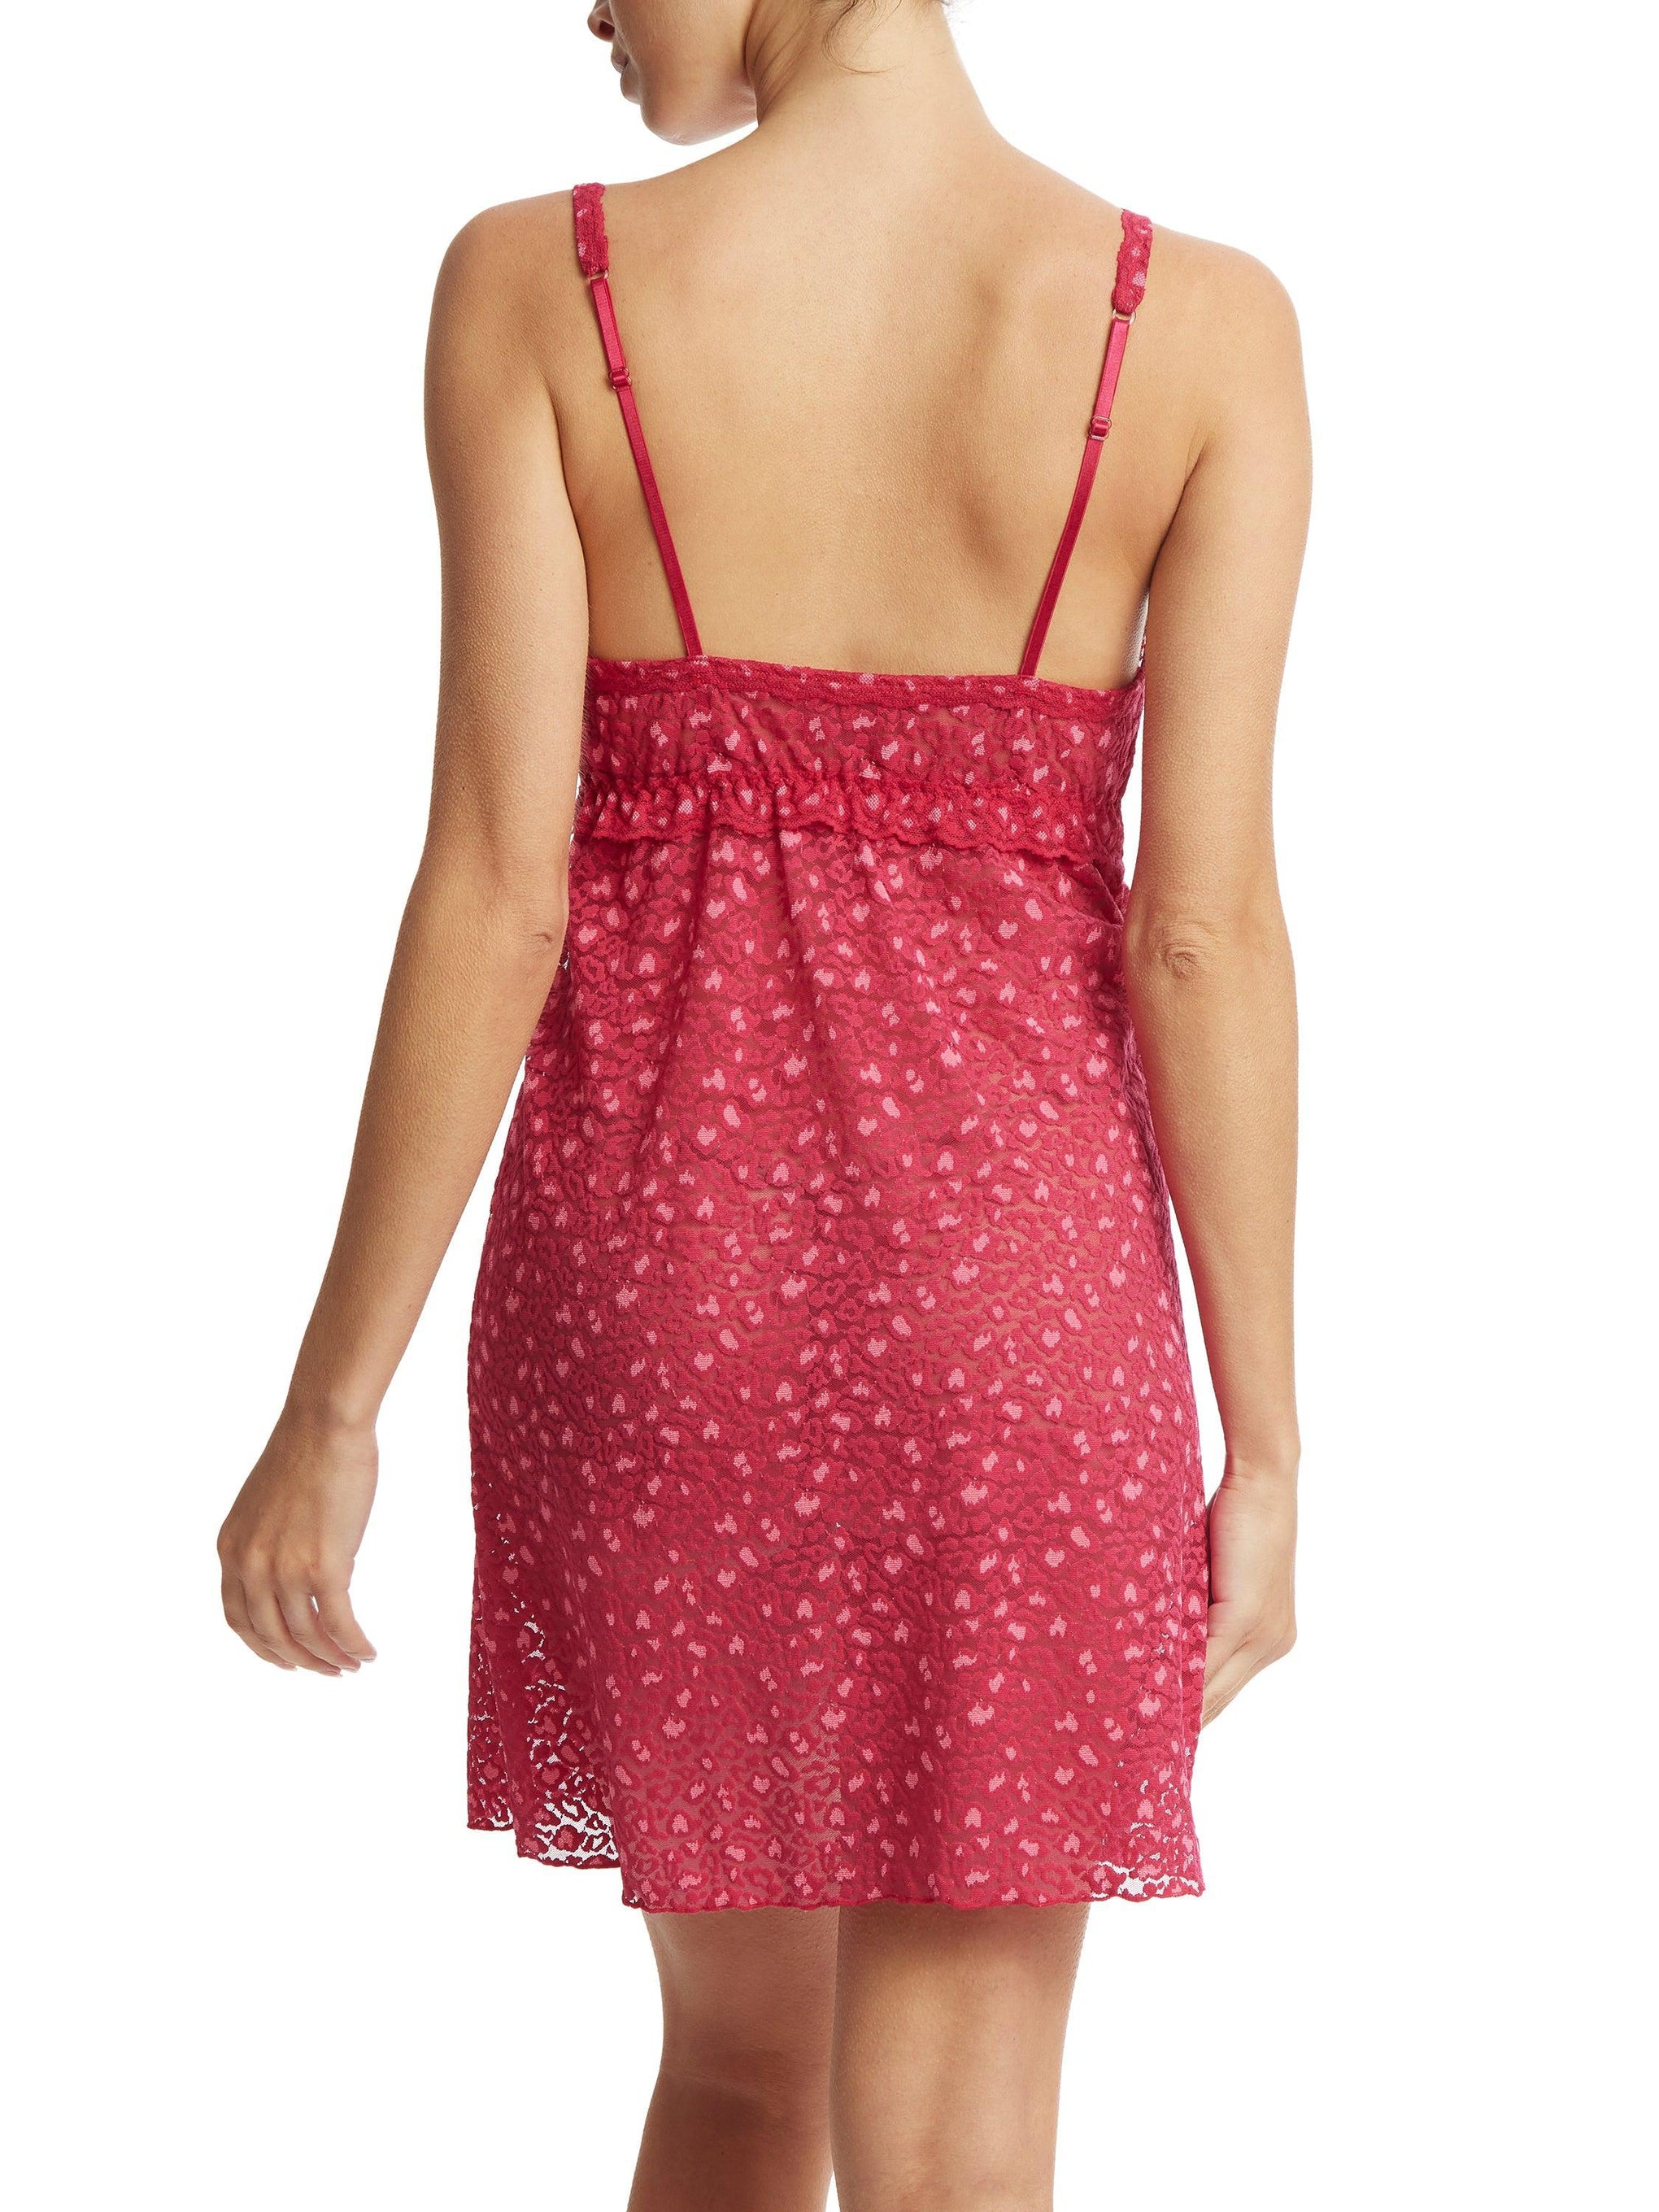 Cross-Dyed Leopard Chemise Berry Sangria Sale